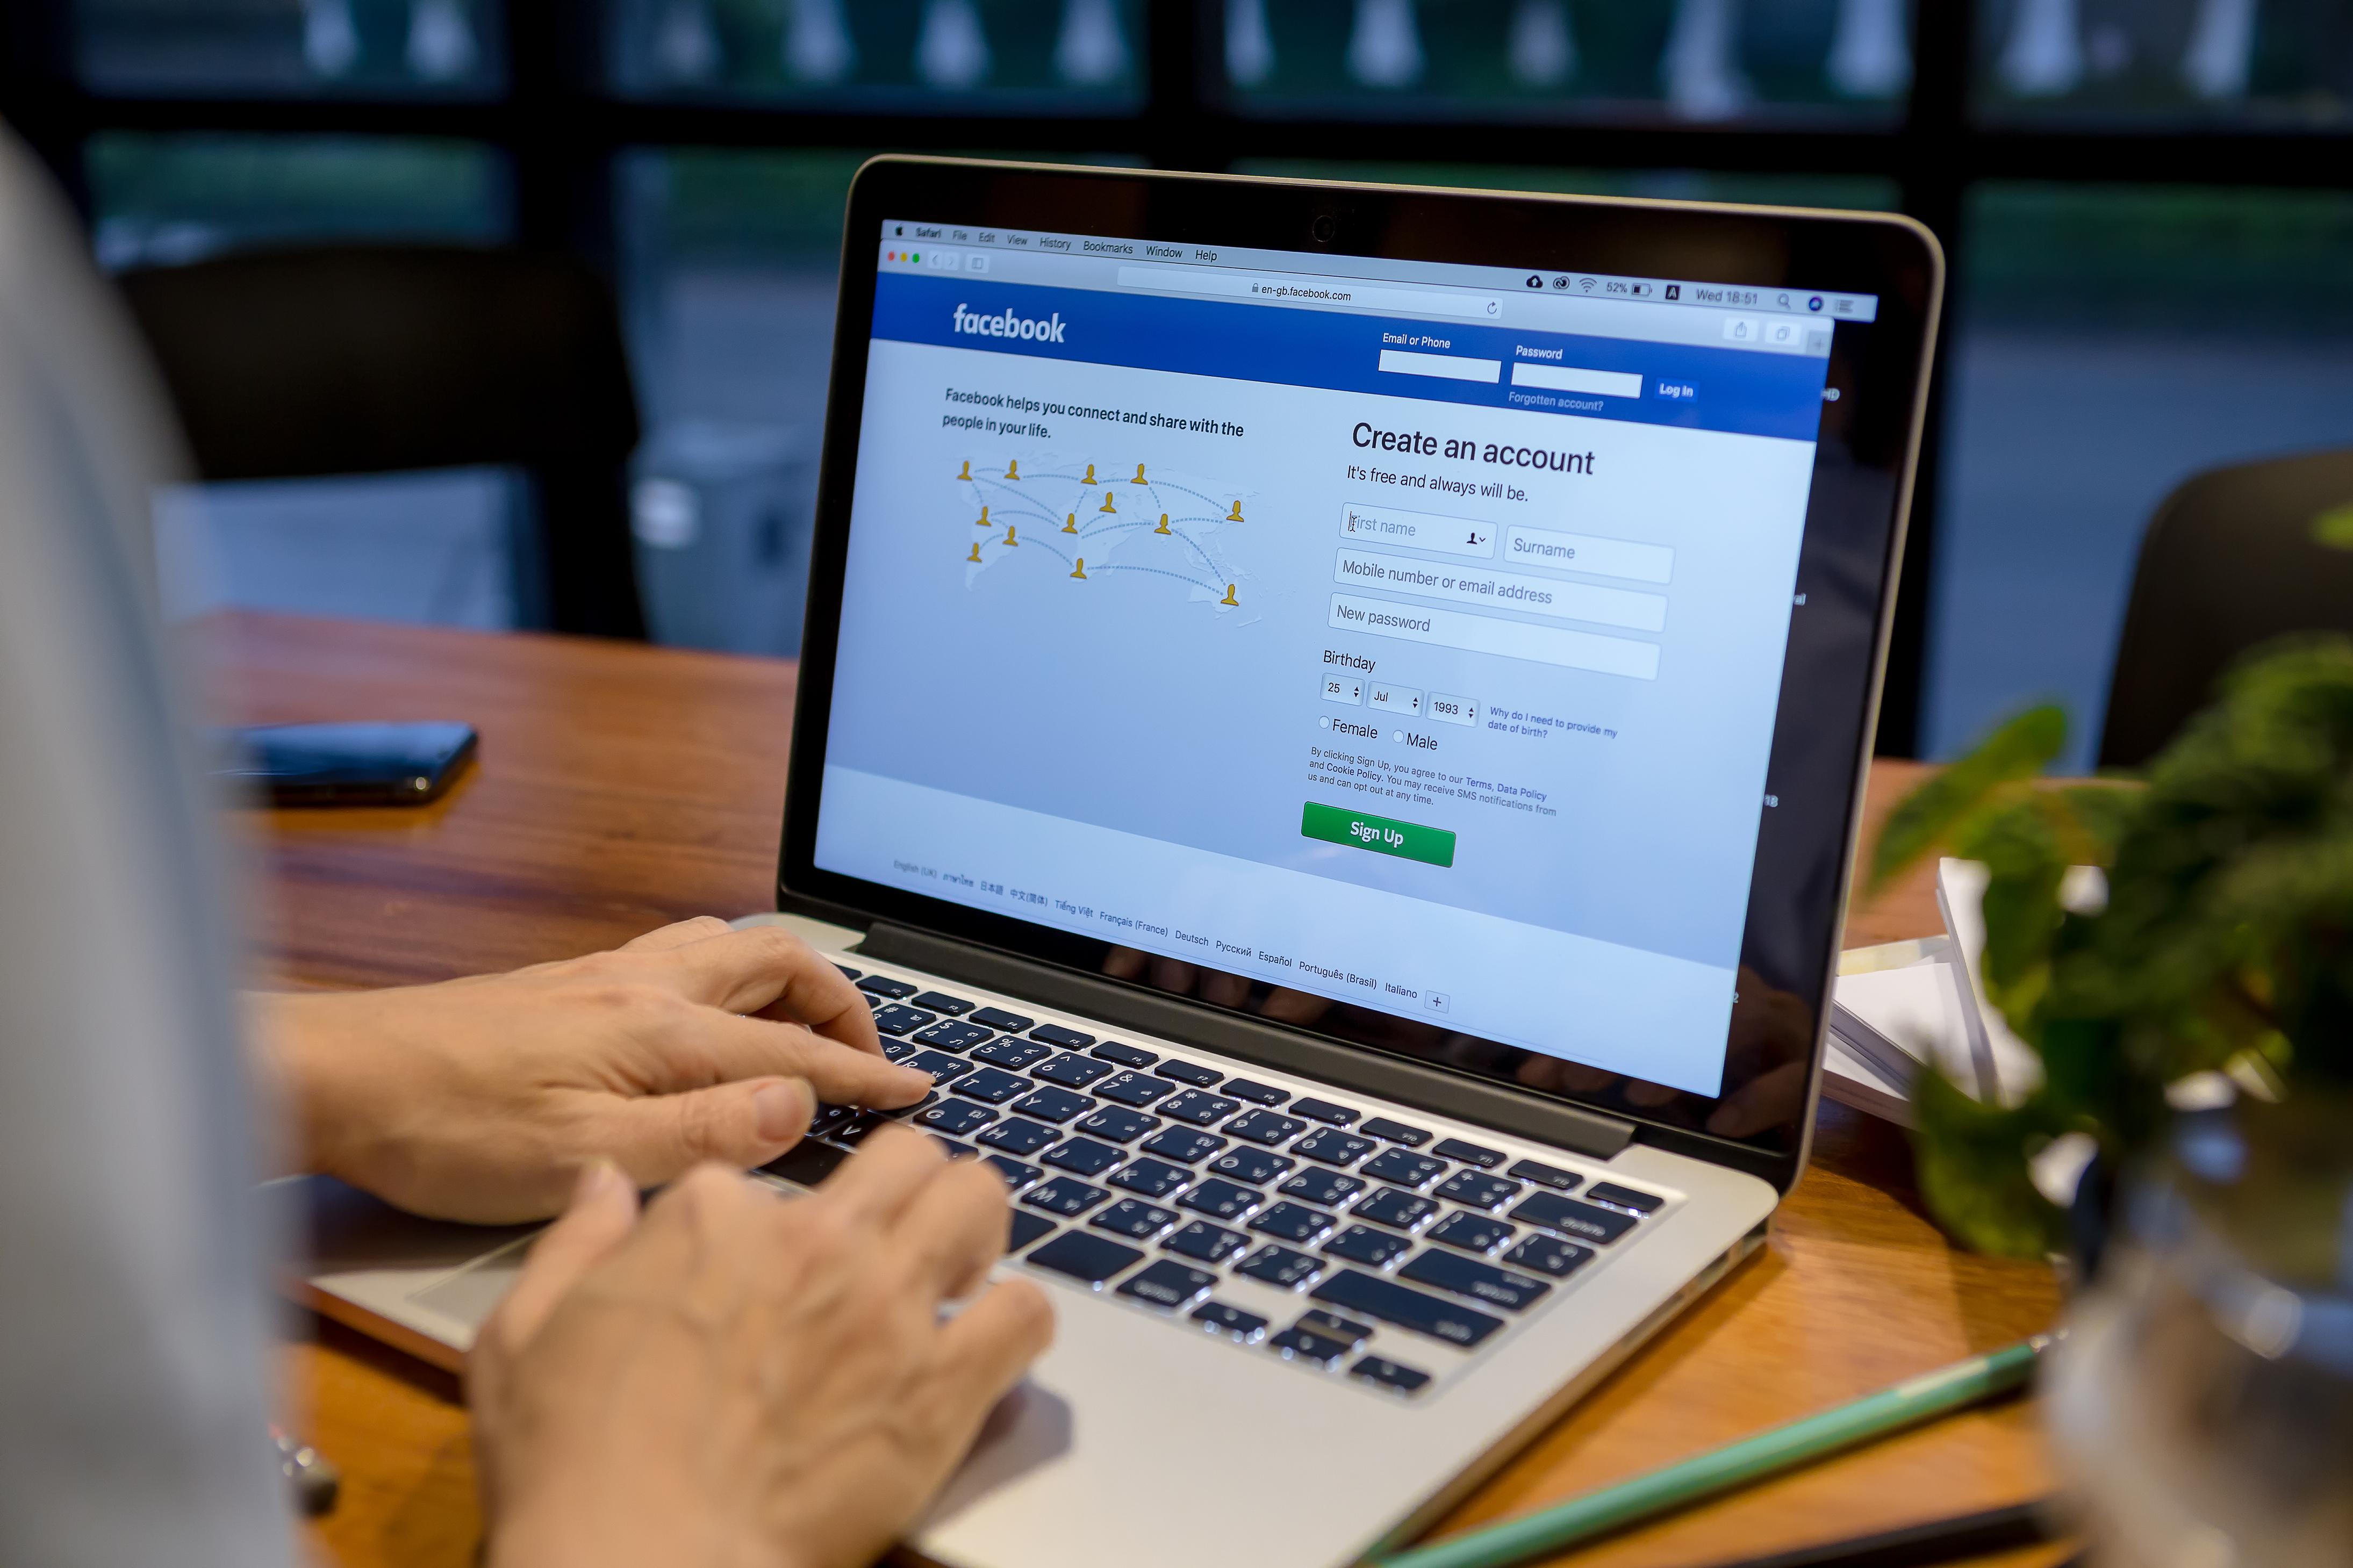 Dr Camilo Tamayo Gomez advises Facebook on policies related to COVID-19